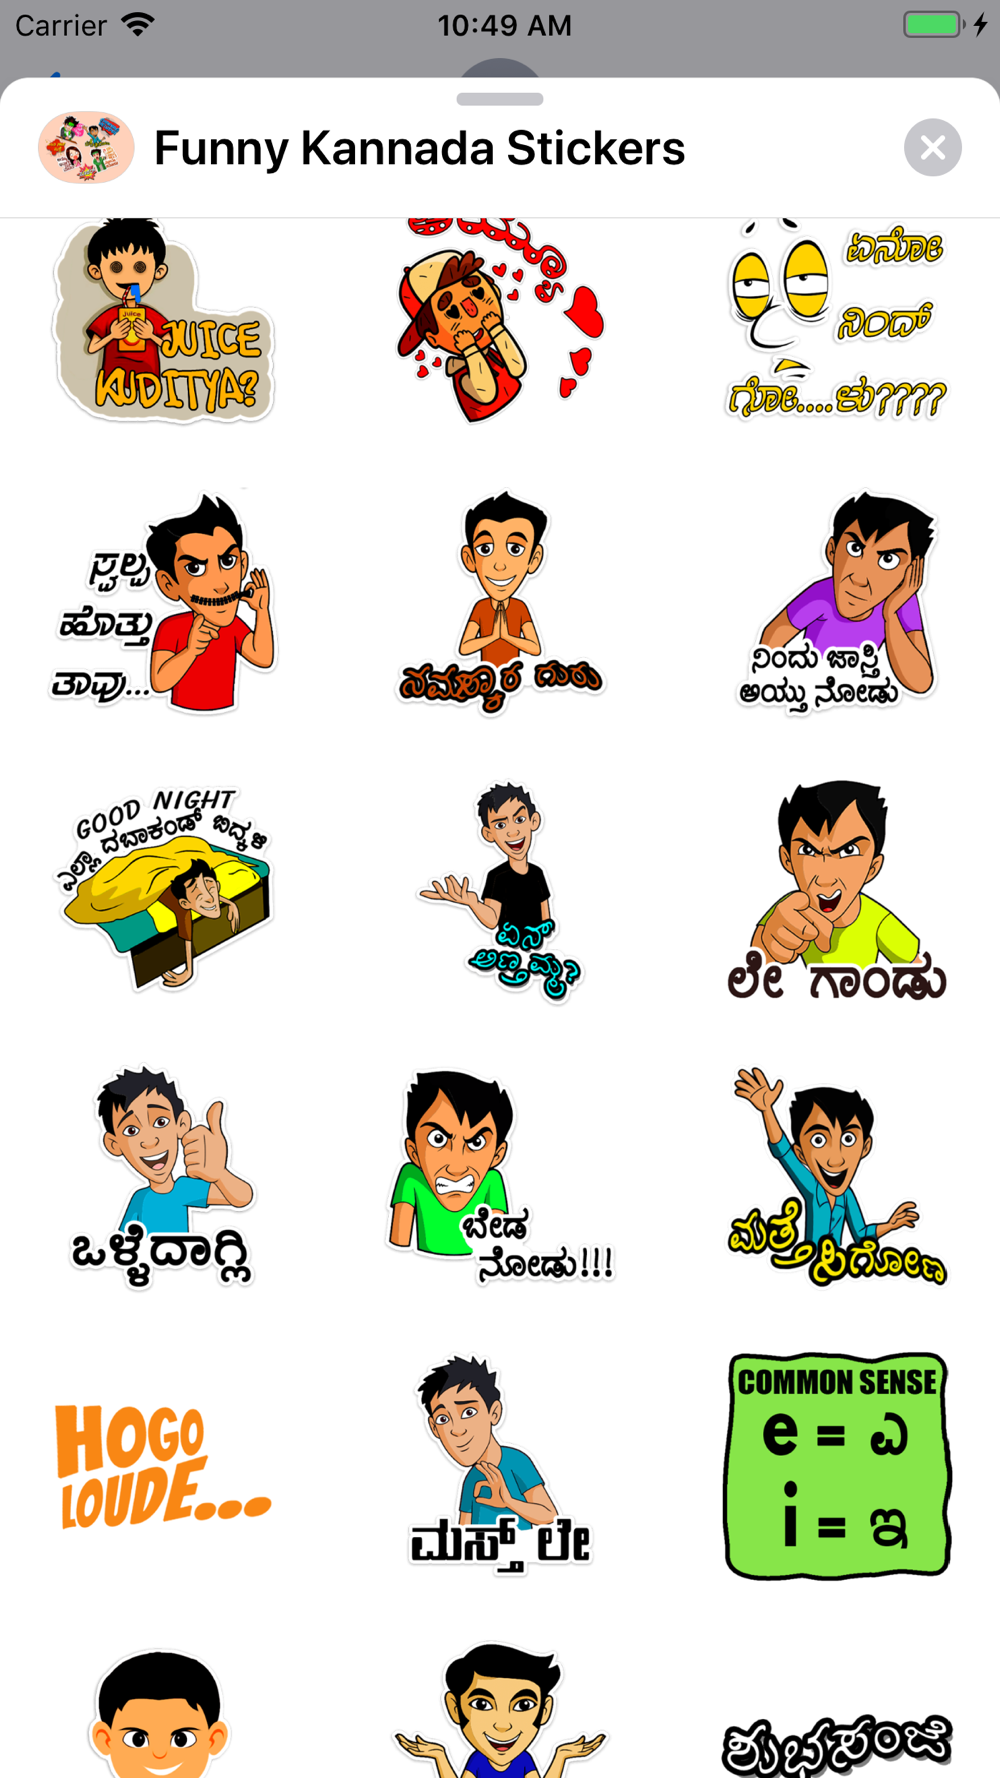 Funny Kannada Stickers Download App for iPhone 